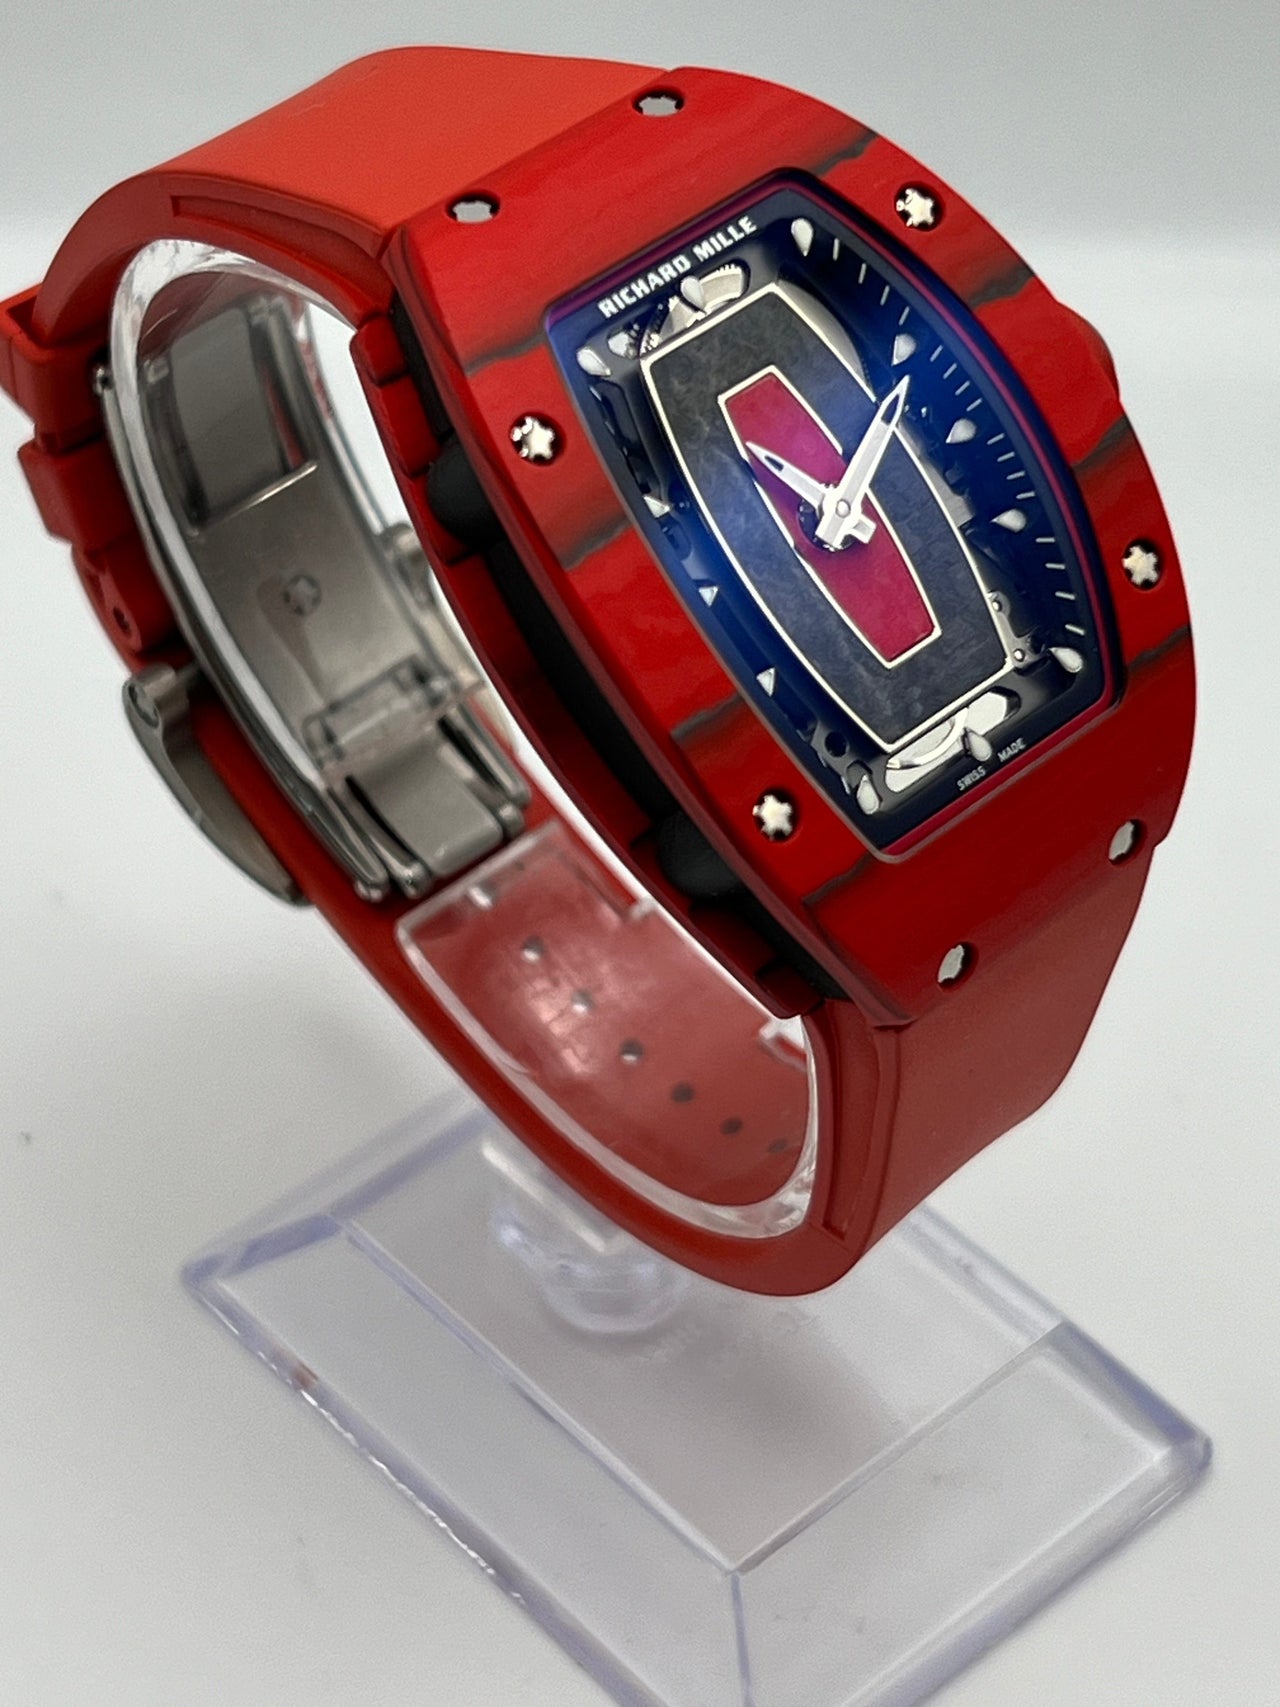 Richard Mille RM 07-01 Ladies' Carbon and Red Quartz TPT Limited Edition